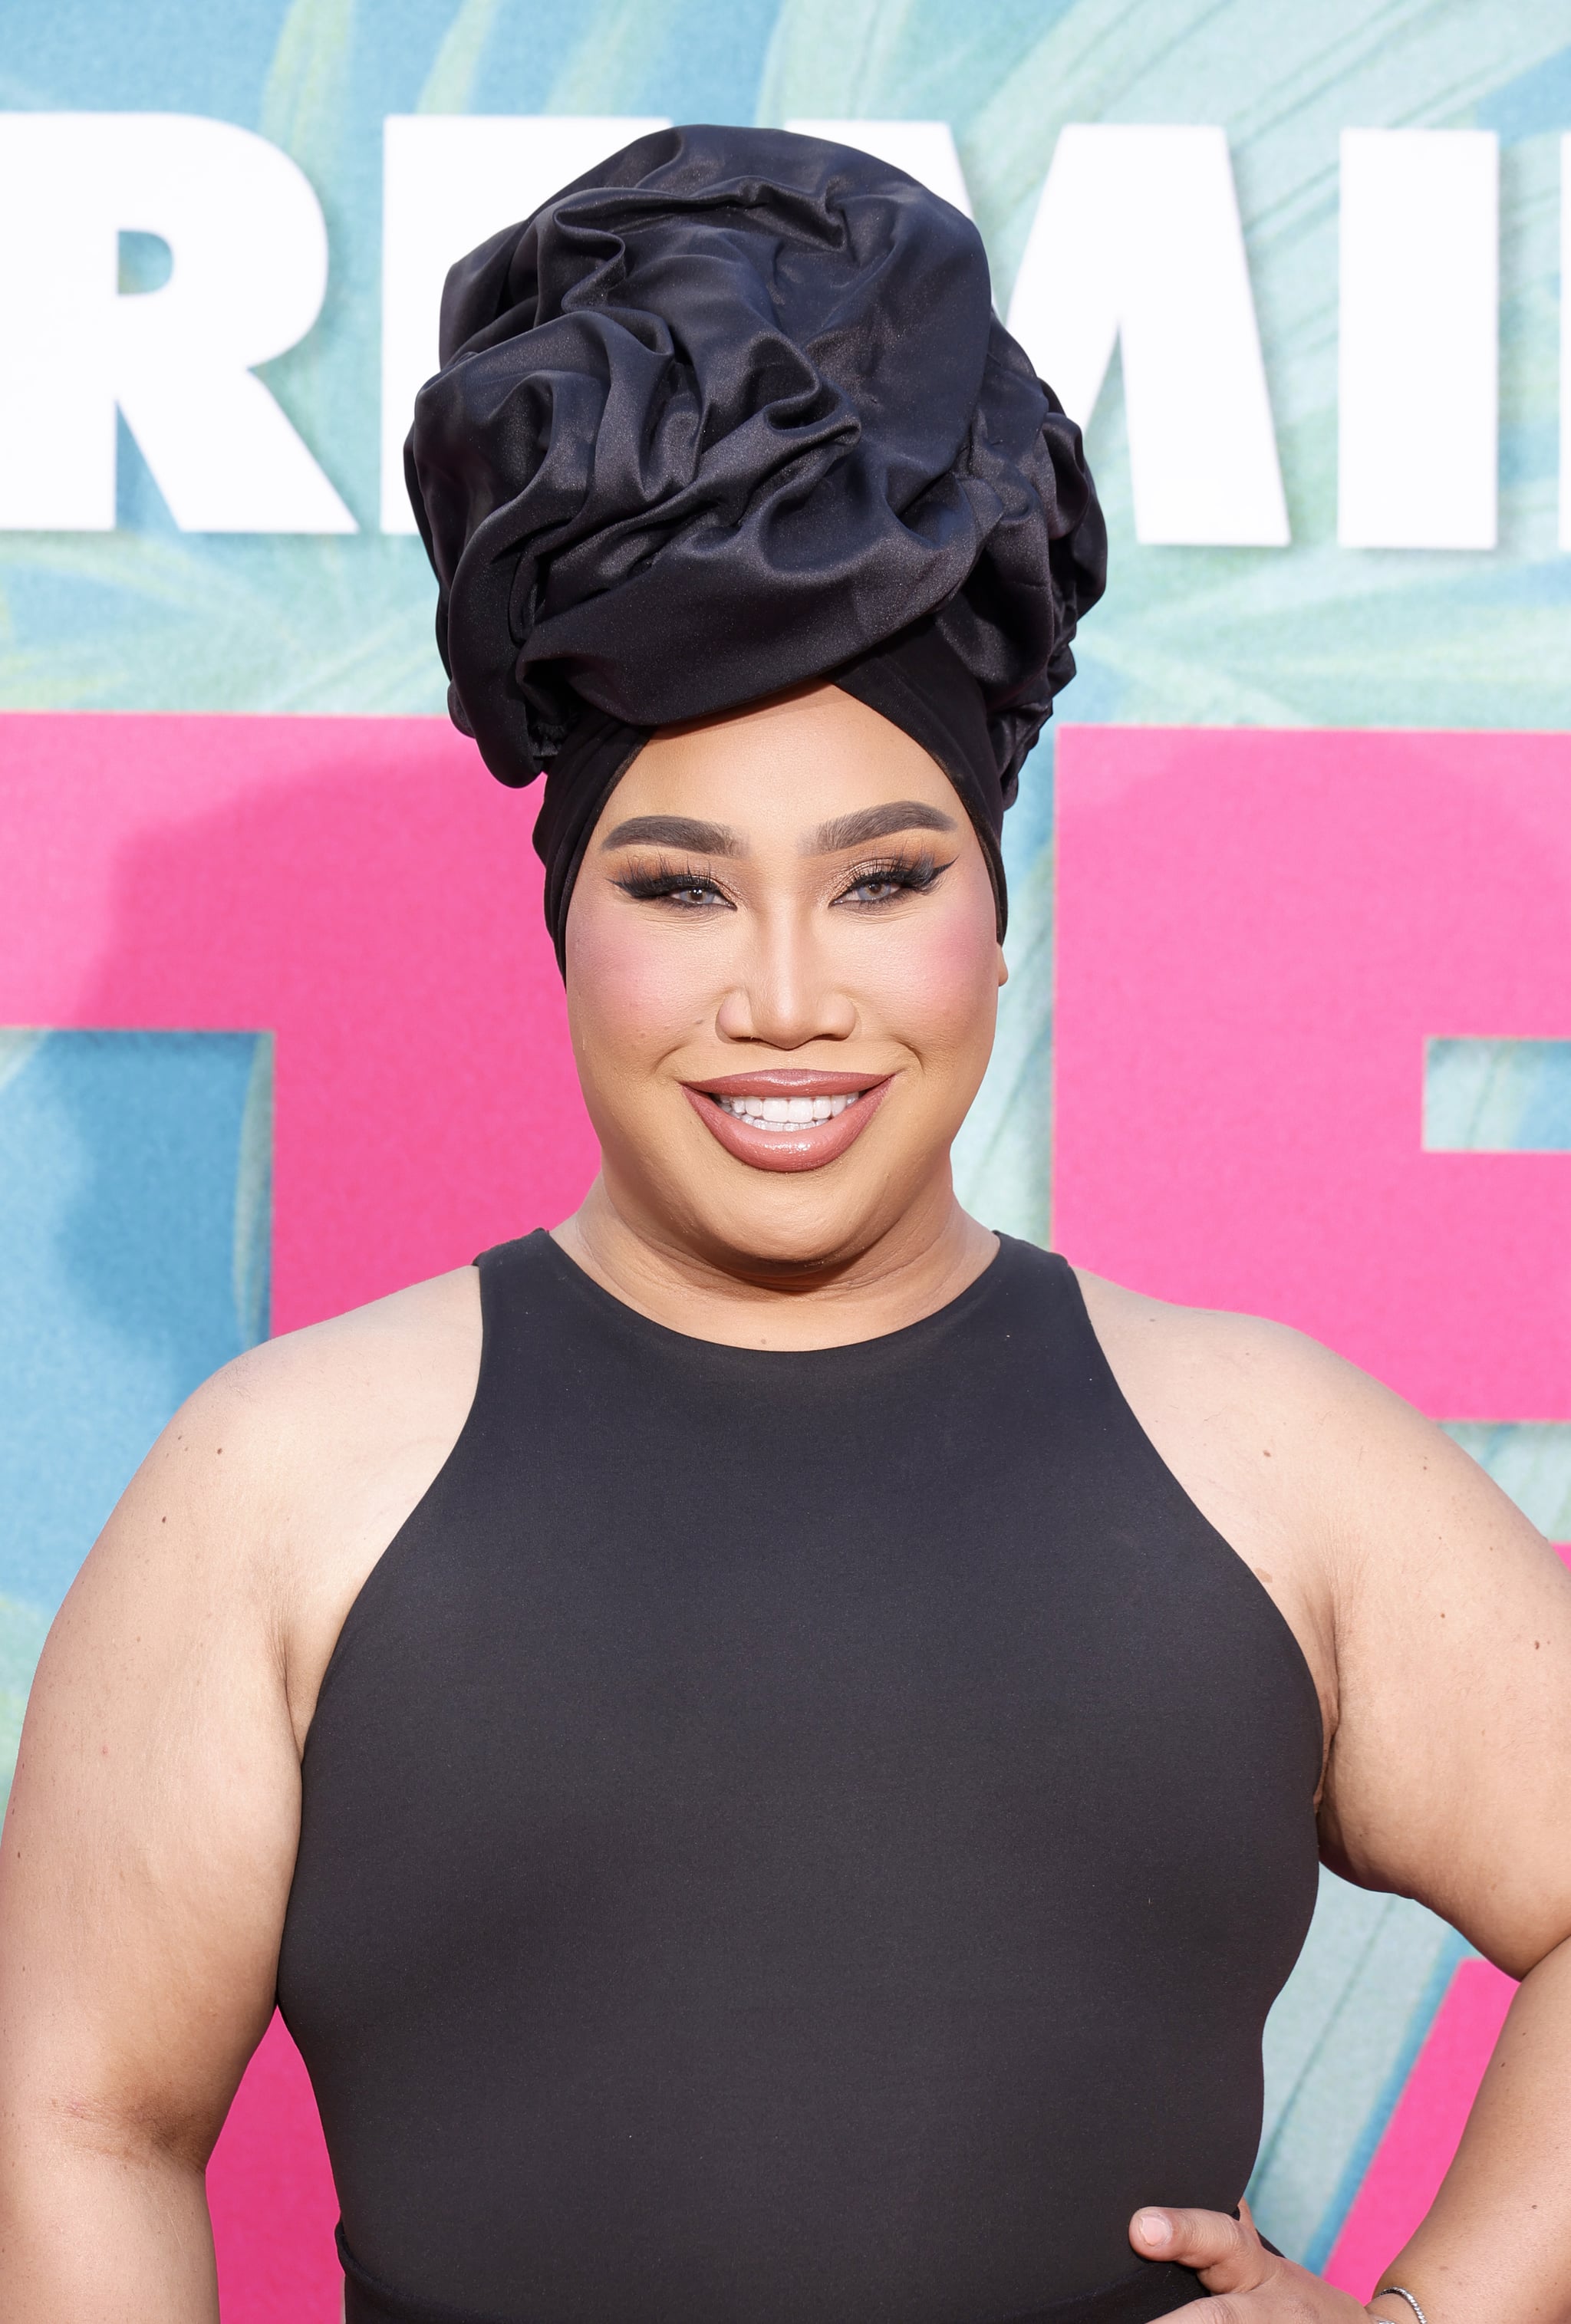 Patrick Starrr Talks About His Makeup Brand, One Size